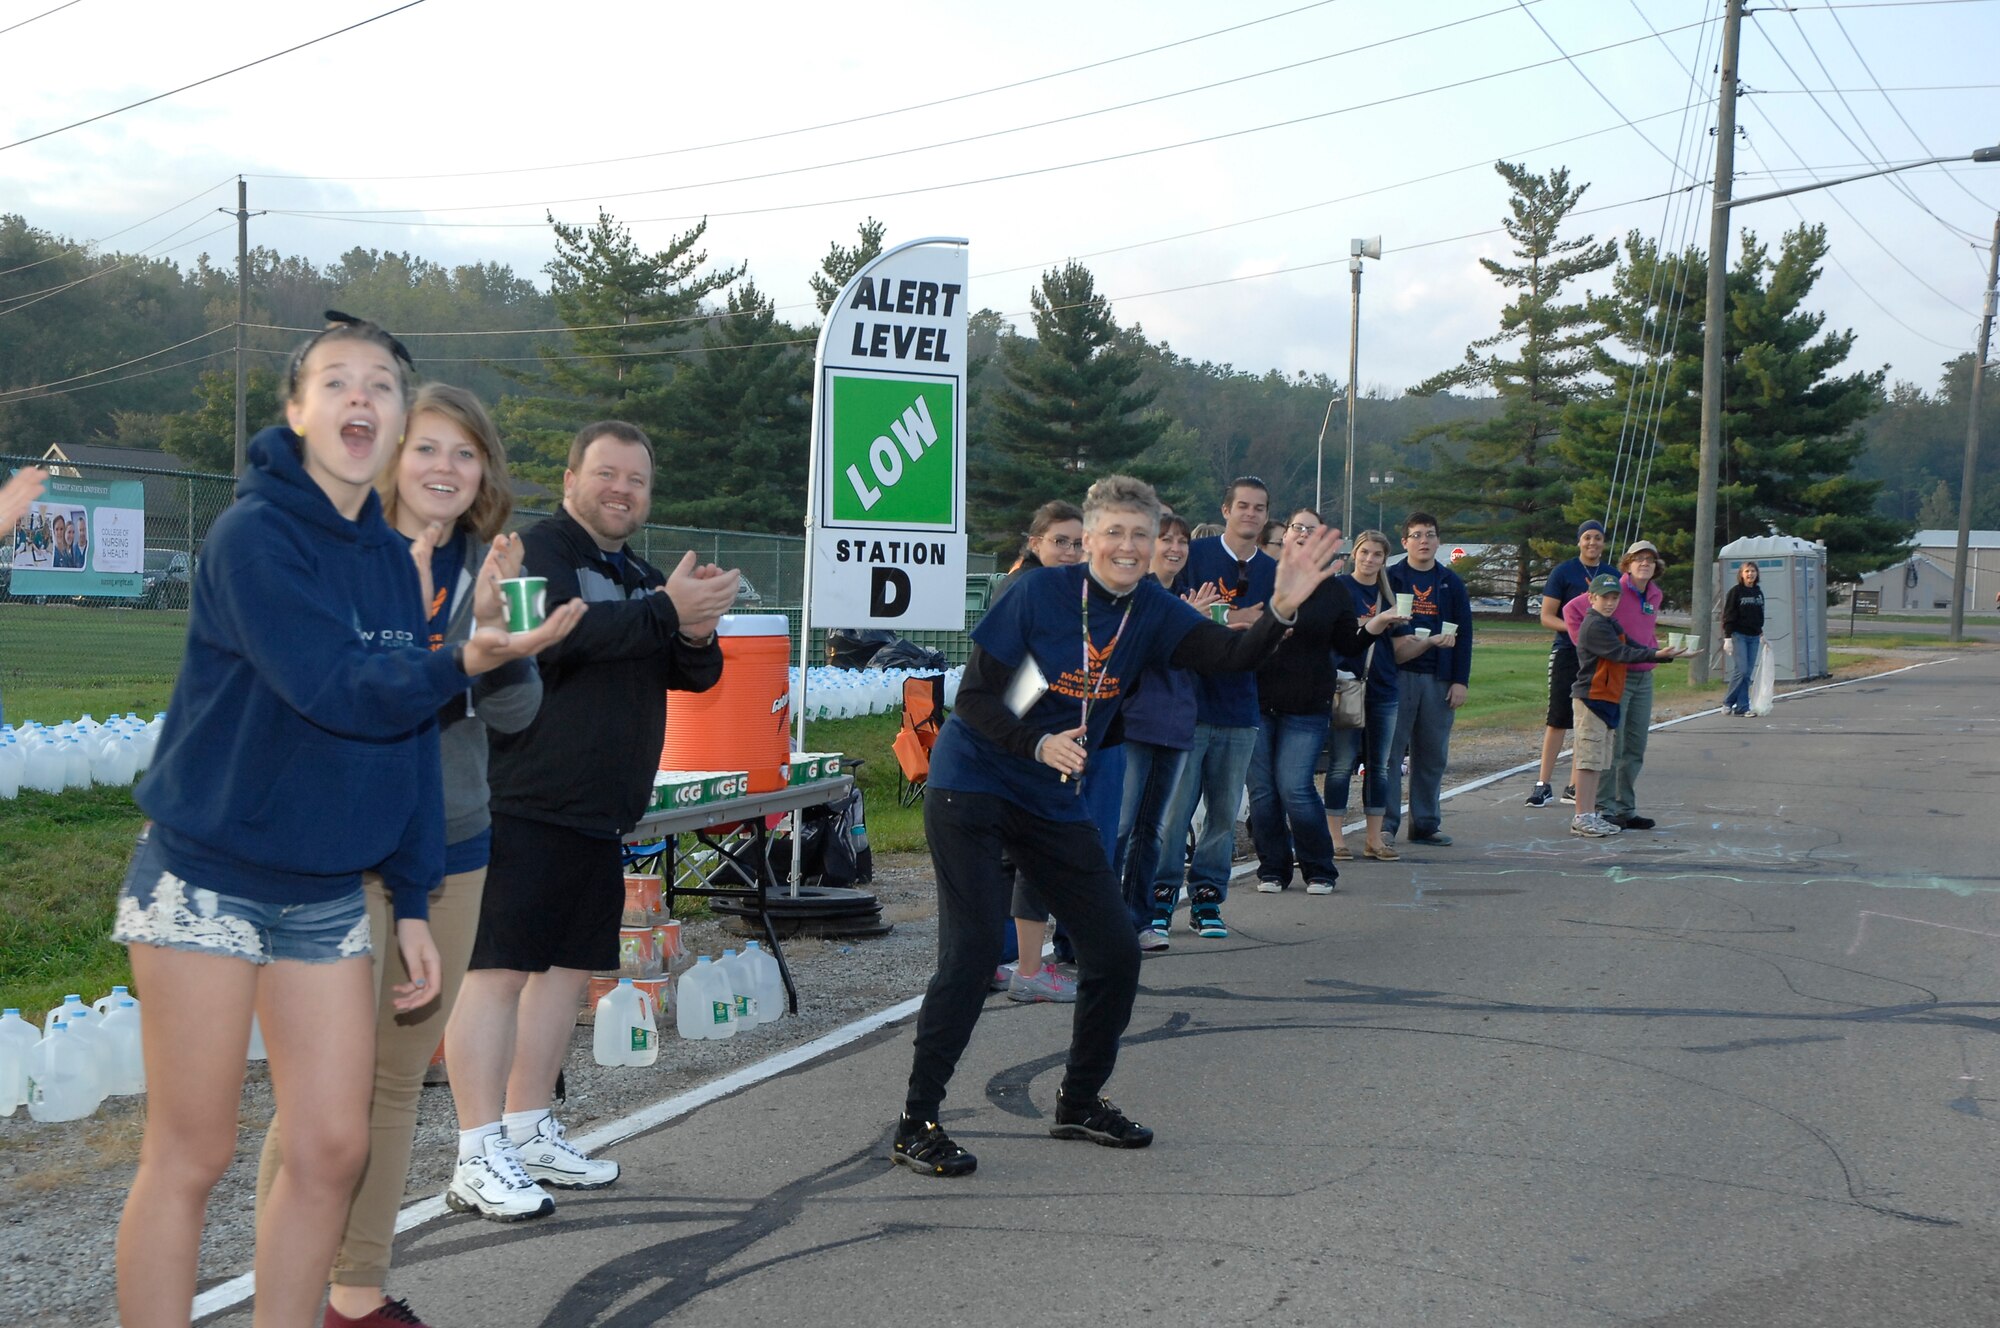 Volunteers pass out water and cheer runners at the 2014 U.S. Air Force Marathon.  U.S. Air Force Photo by Al Bright.